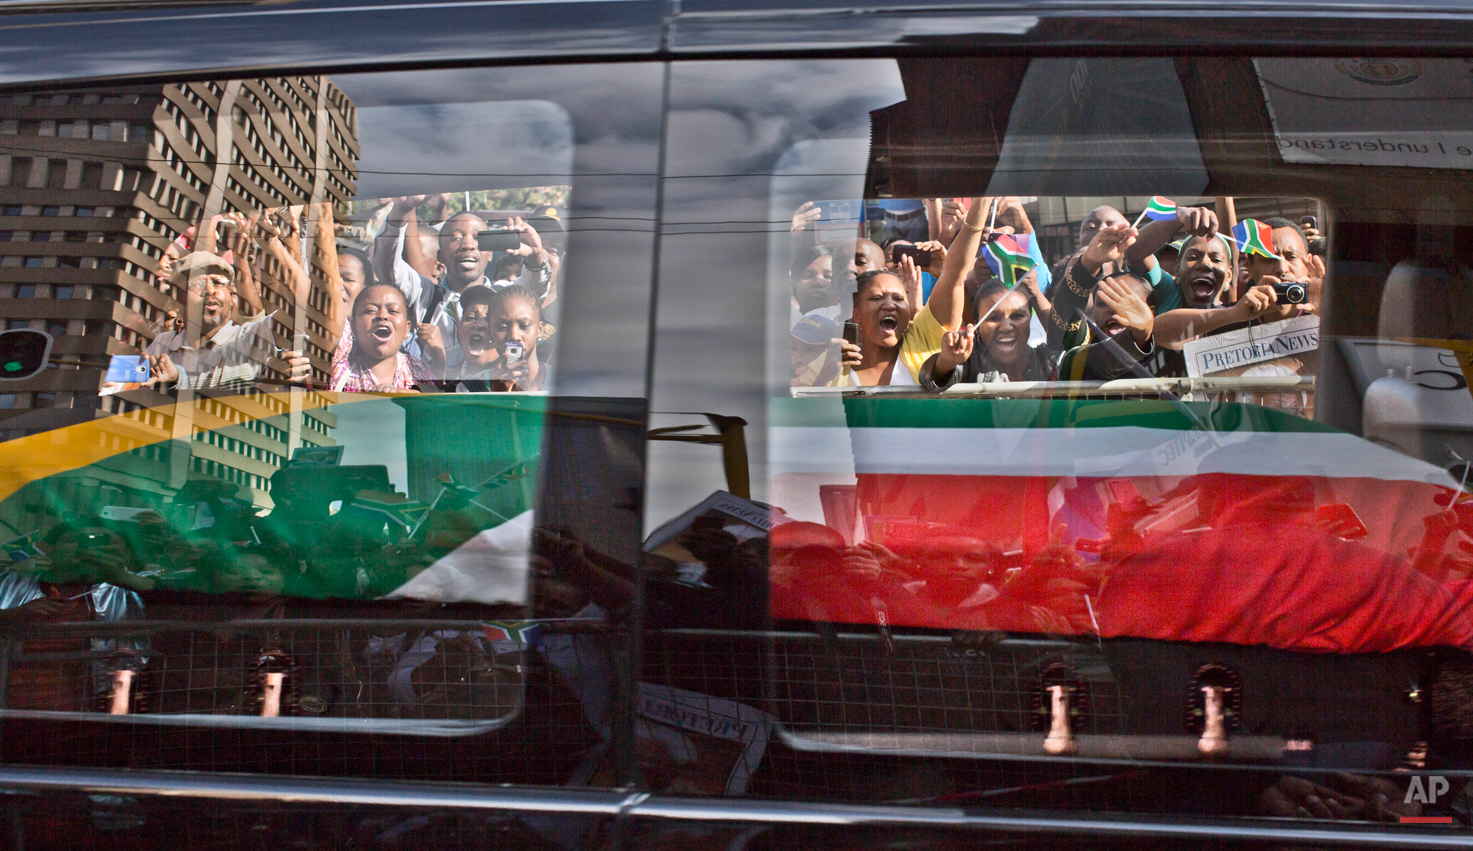  South African mourners, wave and shout as the hearse carrying the body of former South African President Nelson Mandela passes by, in Pretoria, South Africa, Thursday Dec. 12, 2013. (AP Photo/Muhammed Muheisen) 